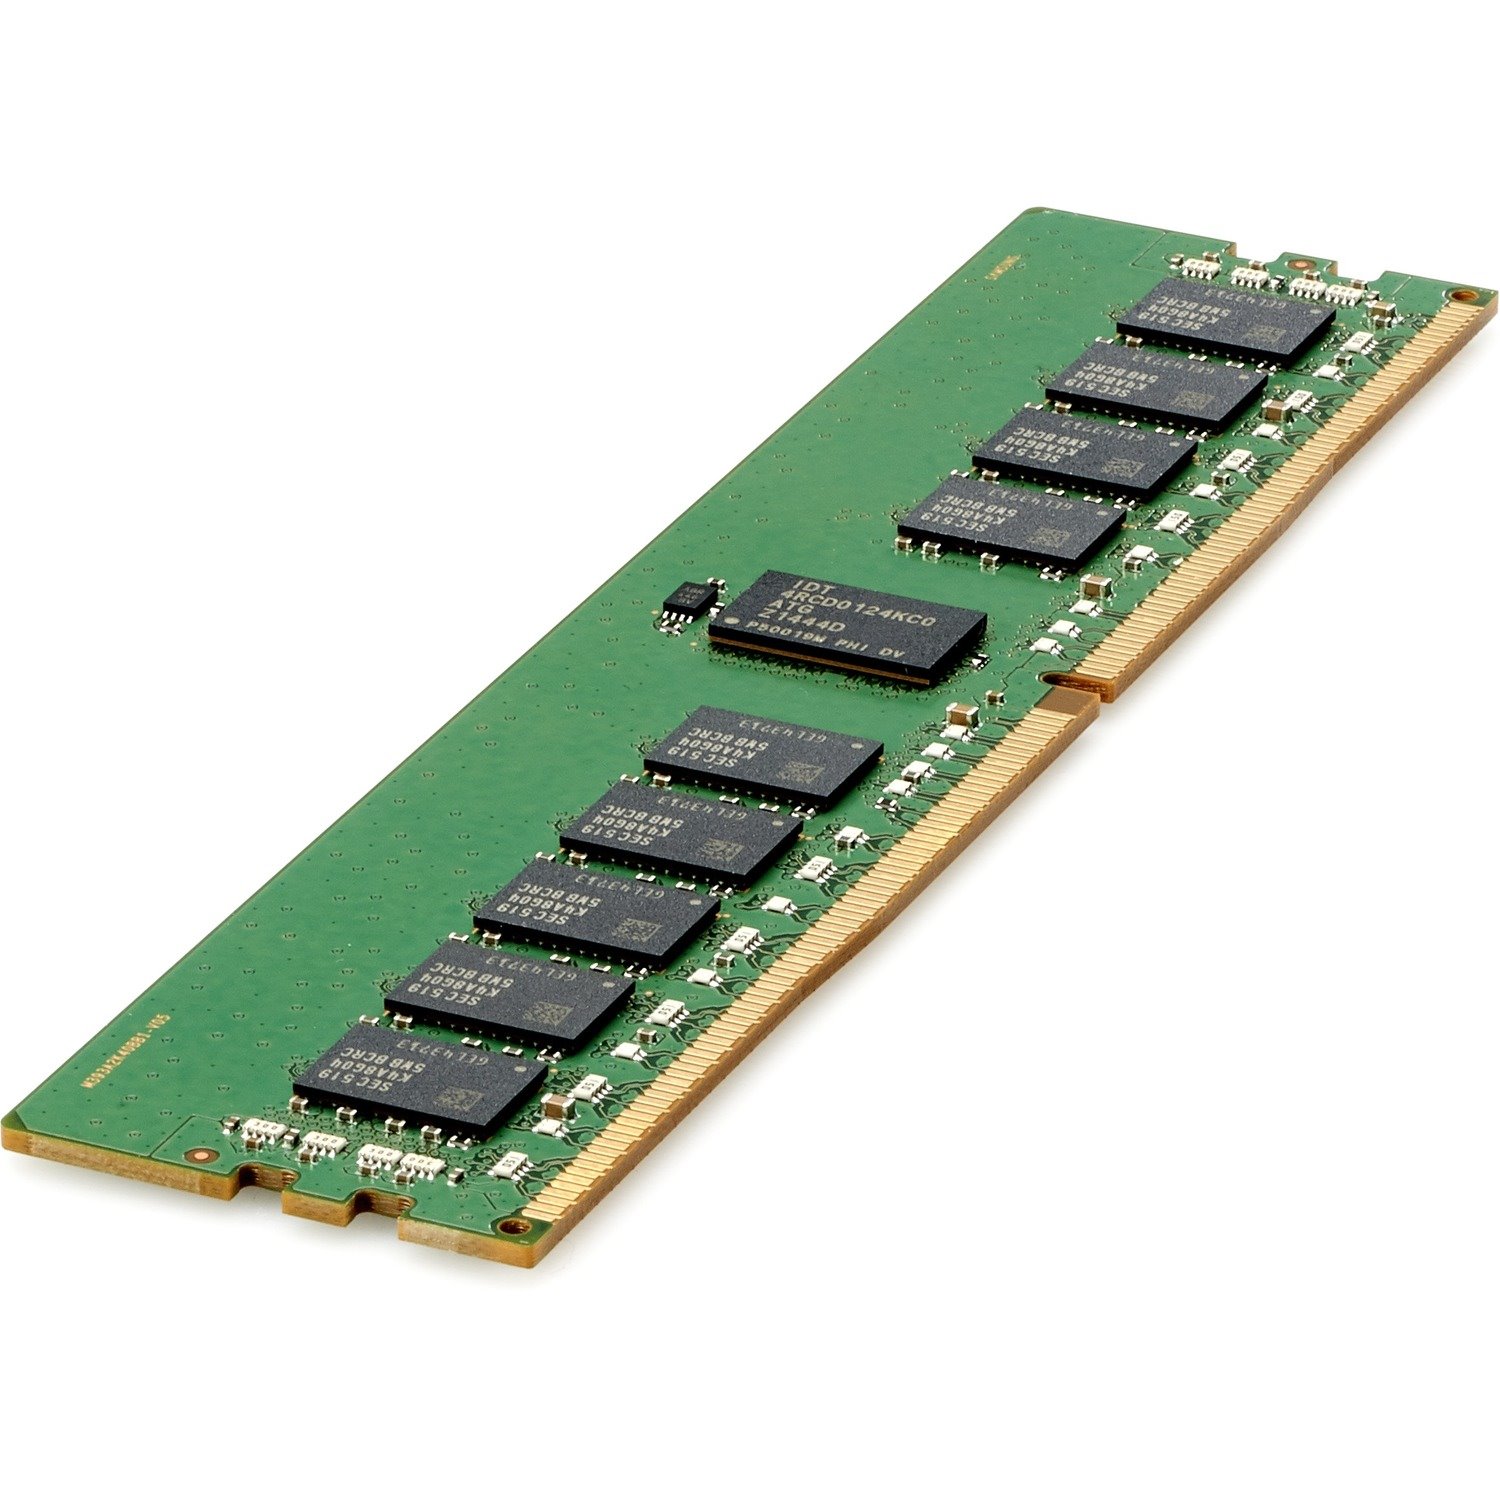 HPE SmartMemory RAM Module for Server - 64 GB (1 x 64GB) - DDR4-2933/PC4-23466 DDR4 SDRAM - 2933 MHz - CL21 - 1.20 V